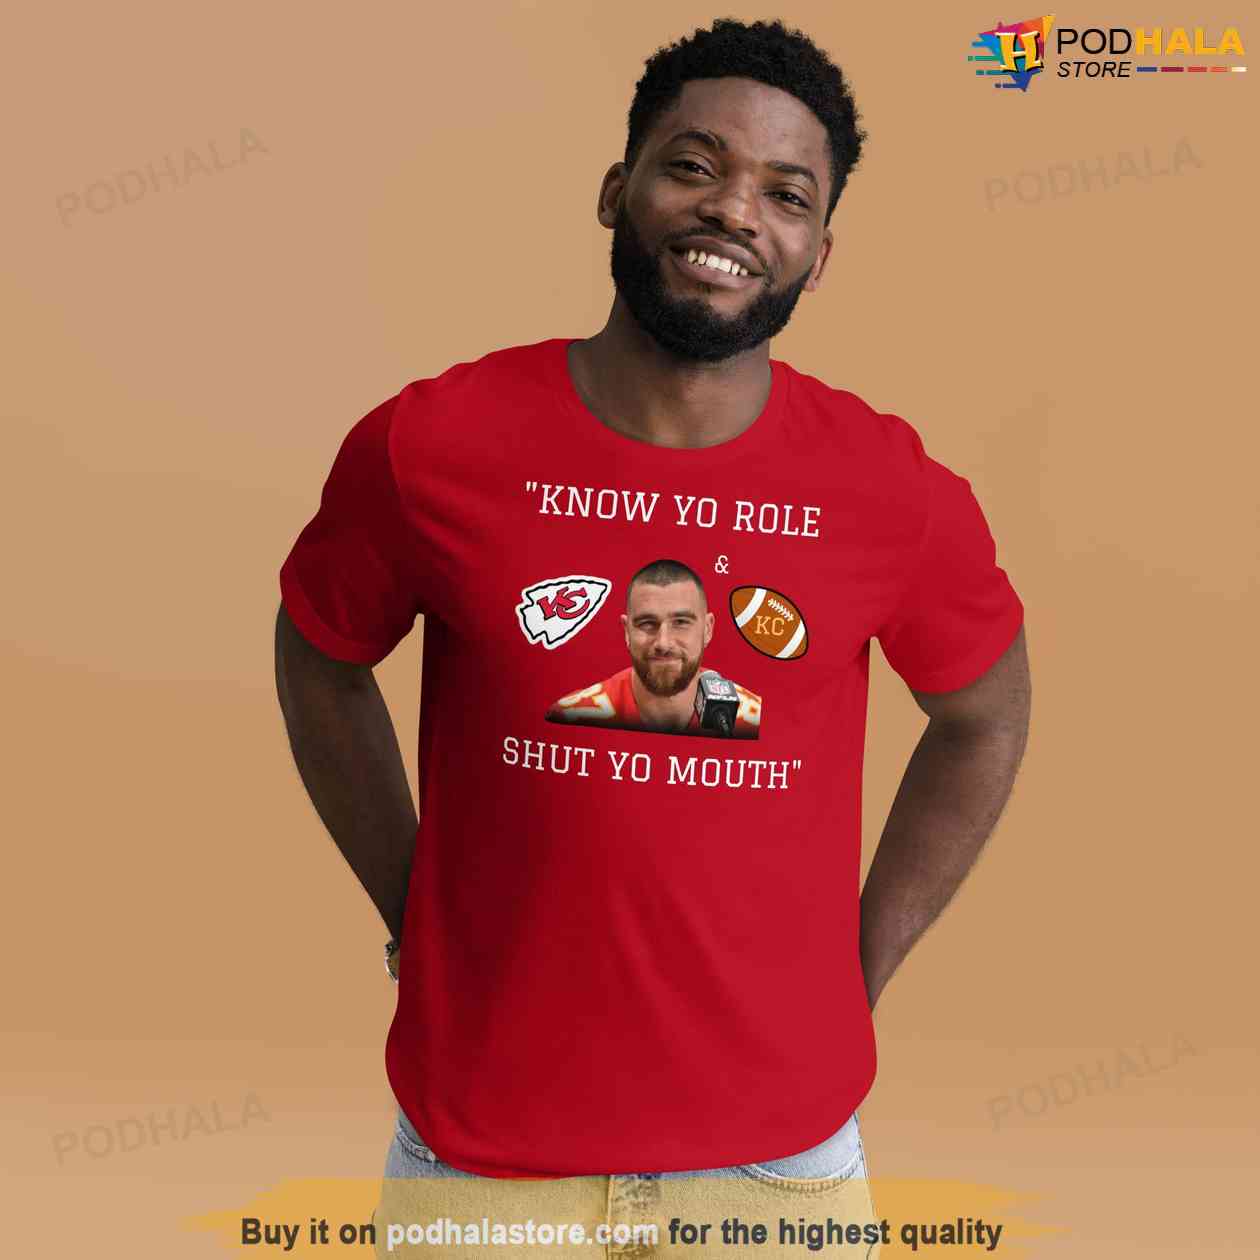 know your role and shut your mouth chiefs shirt